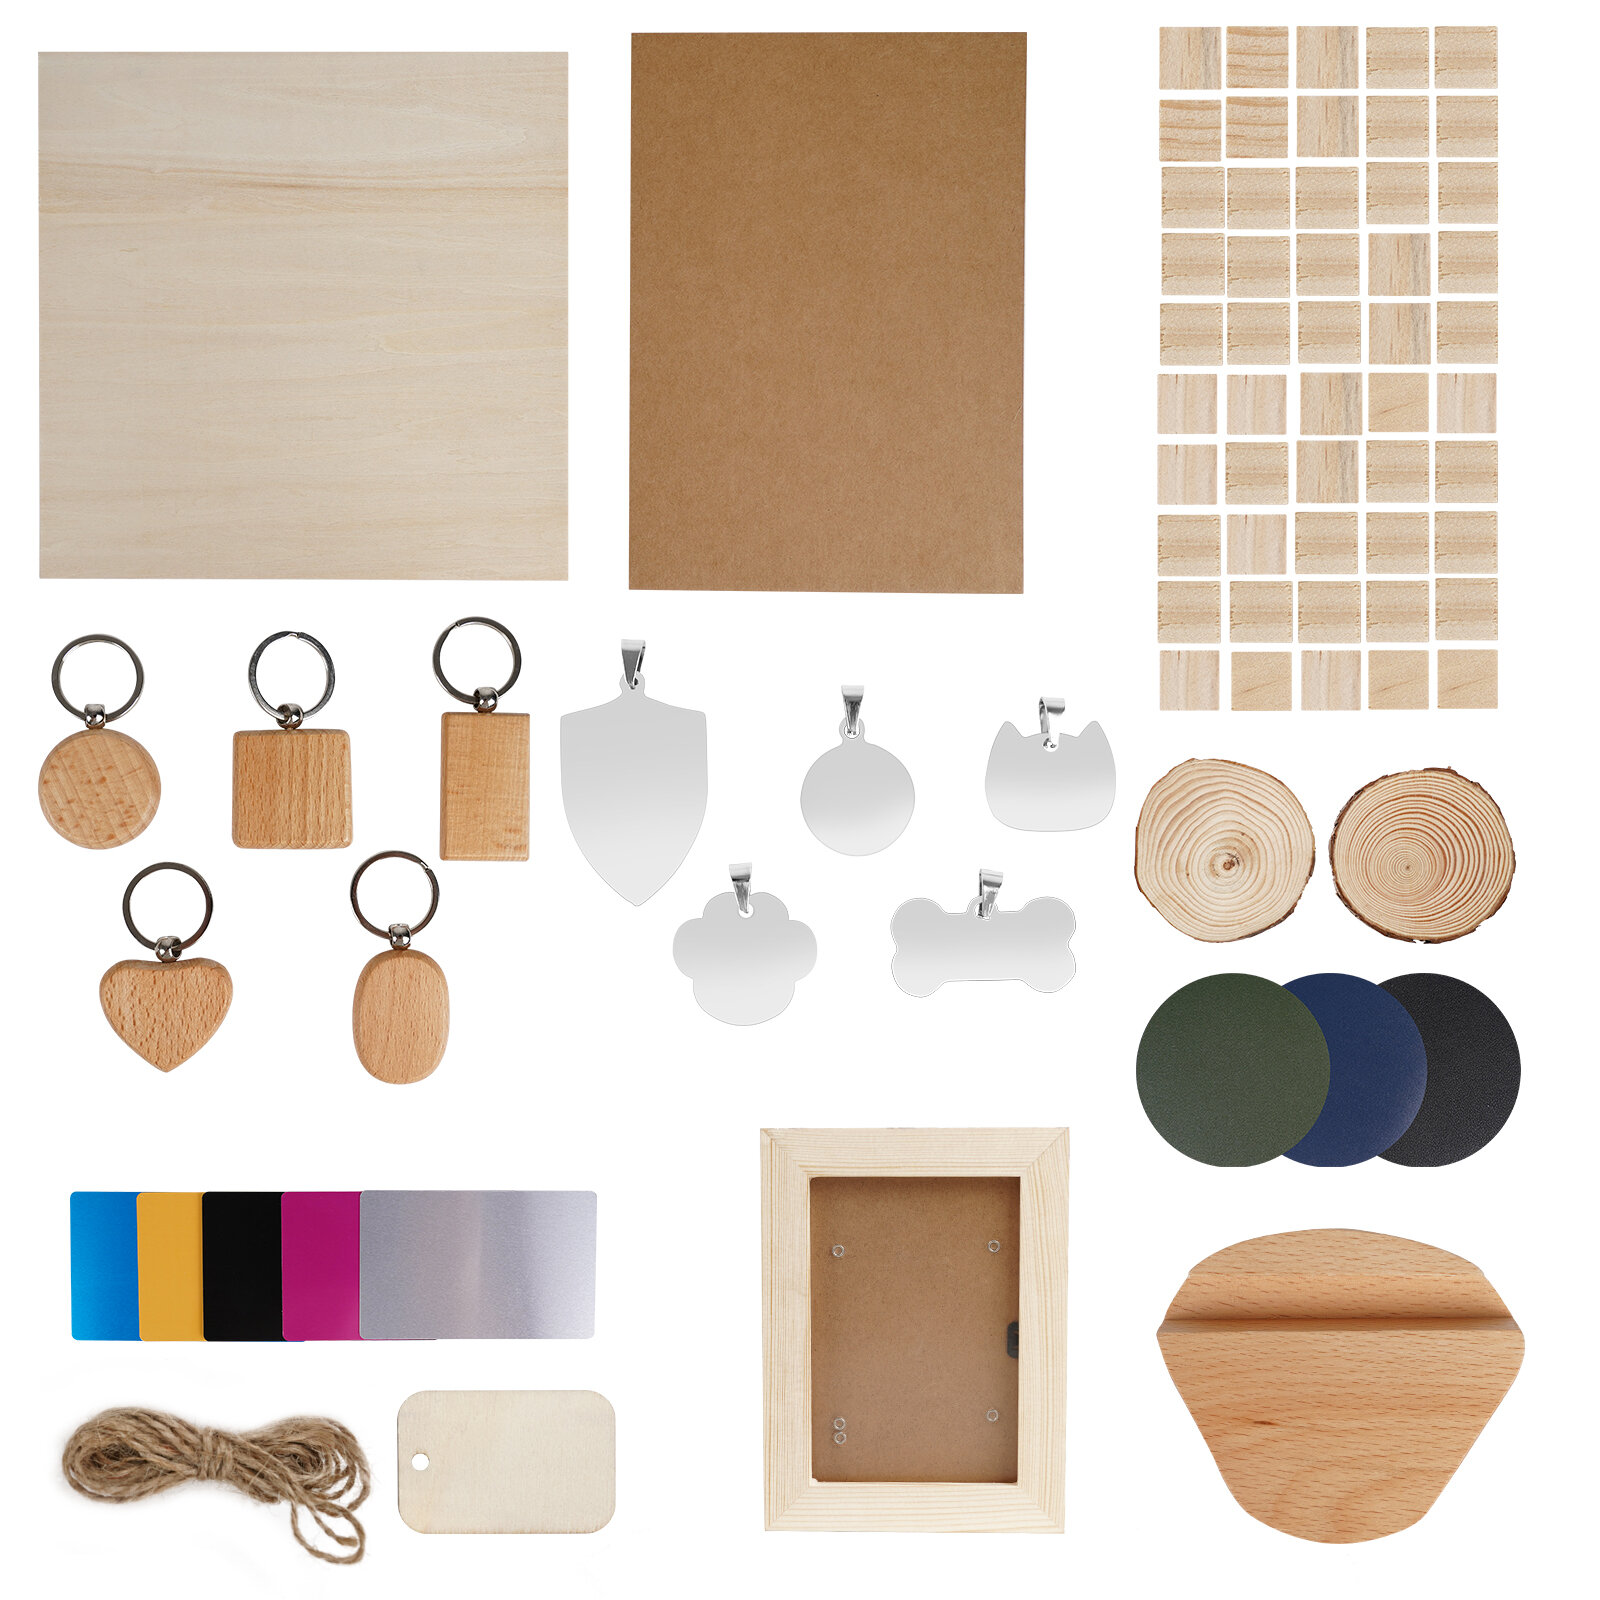 TWOTREES Laser Engraving Materials Pack Wood/Leather/Stainless Stain/Kraft cardboard for Laser Engraving Laser Cutting